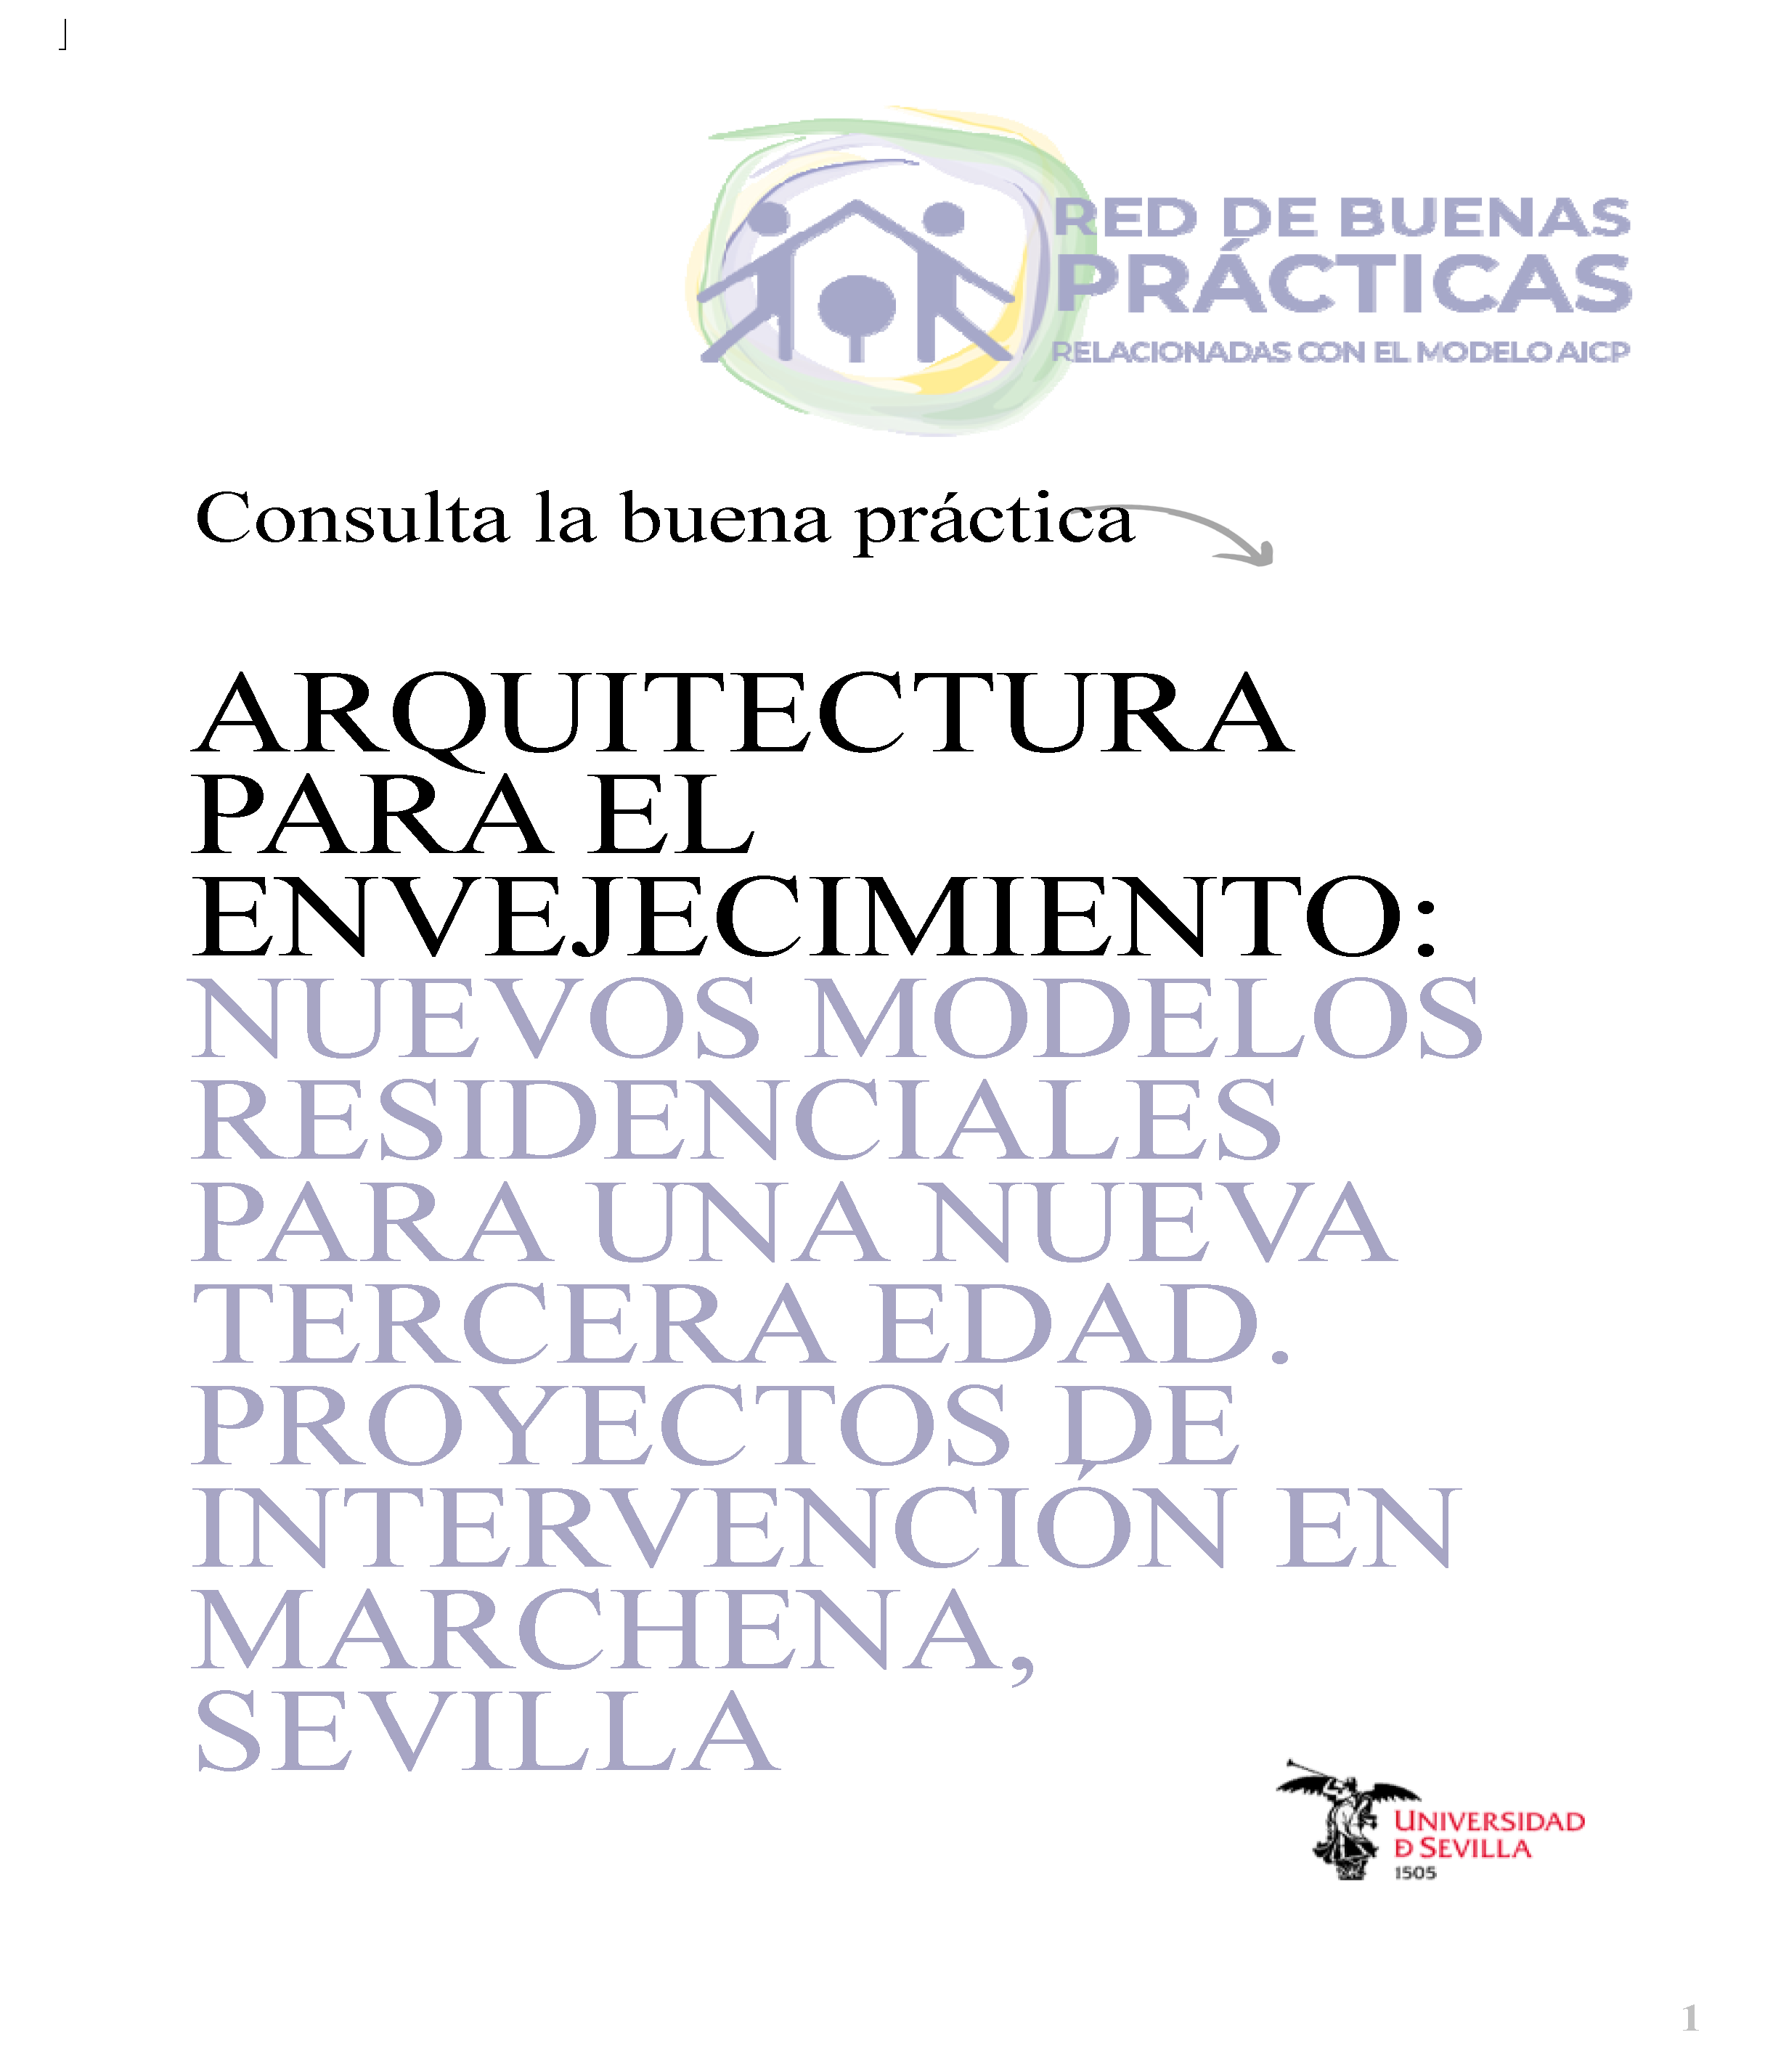 Pages from Maqueta aCTIVAeNVEJECIMIENTO ACT 2021 v 1